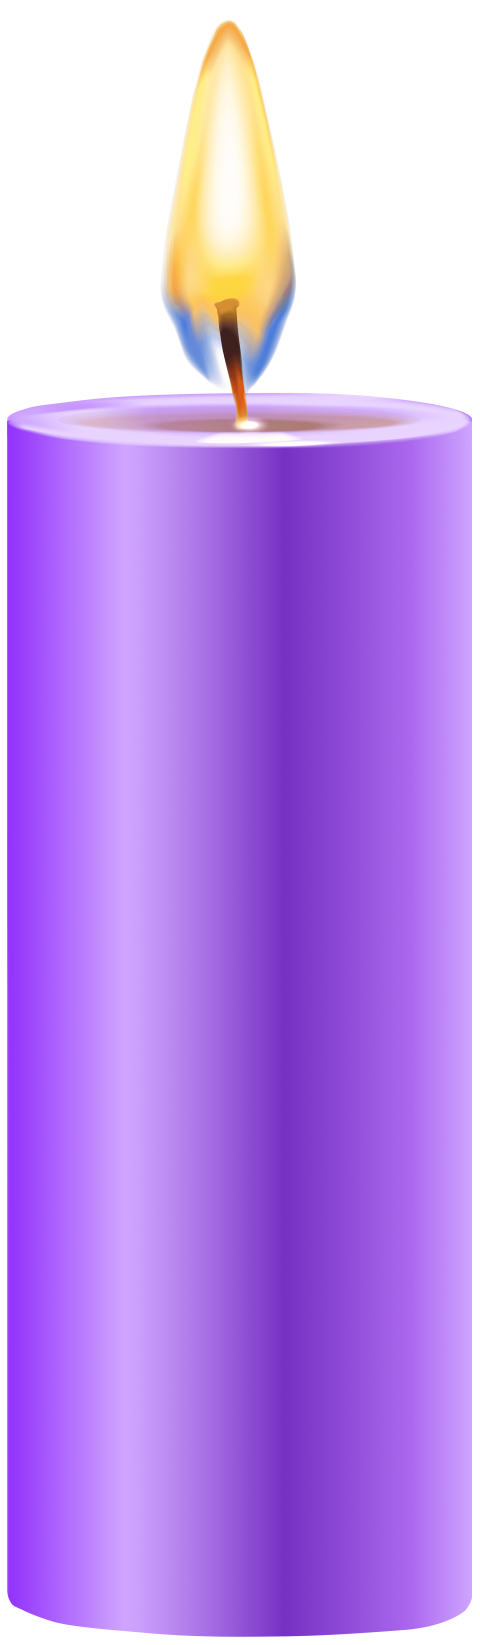 clipart candle purple candle